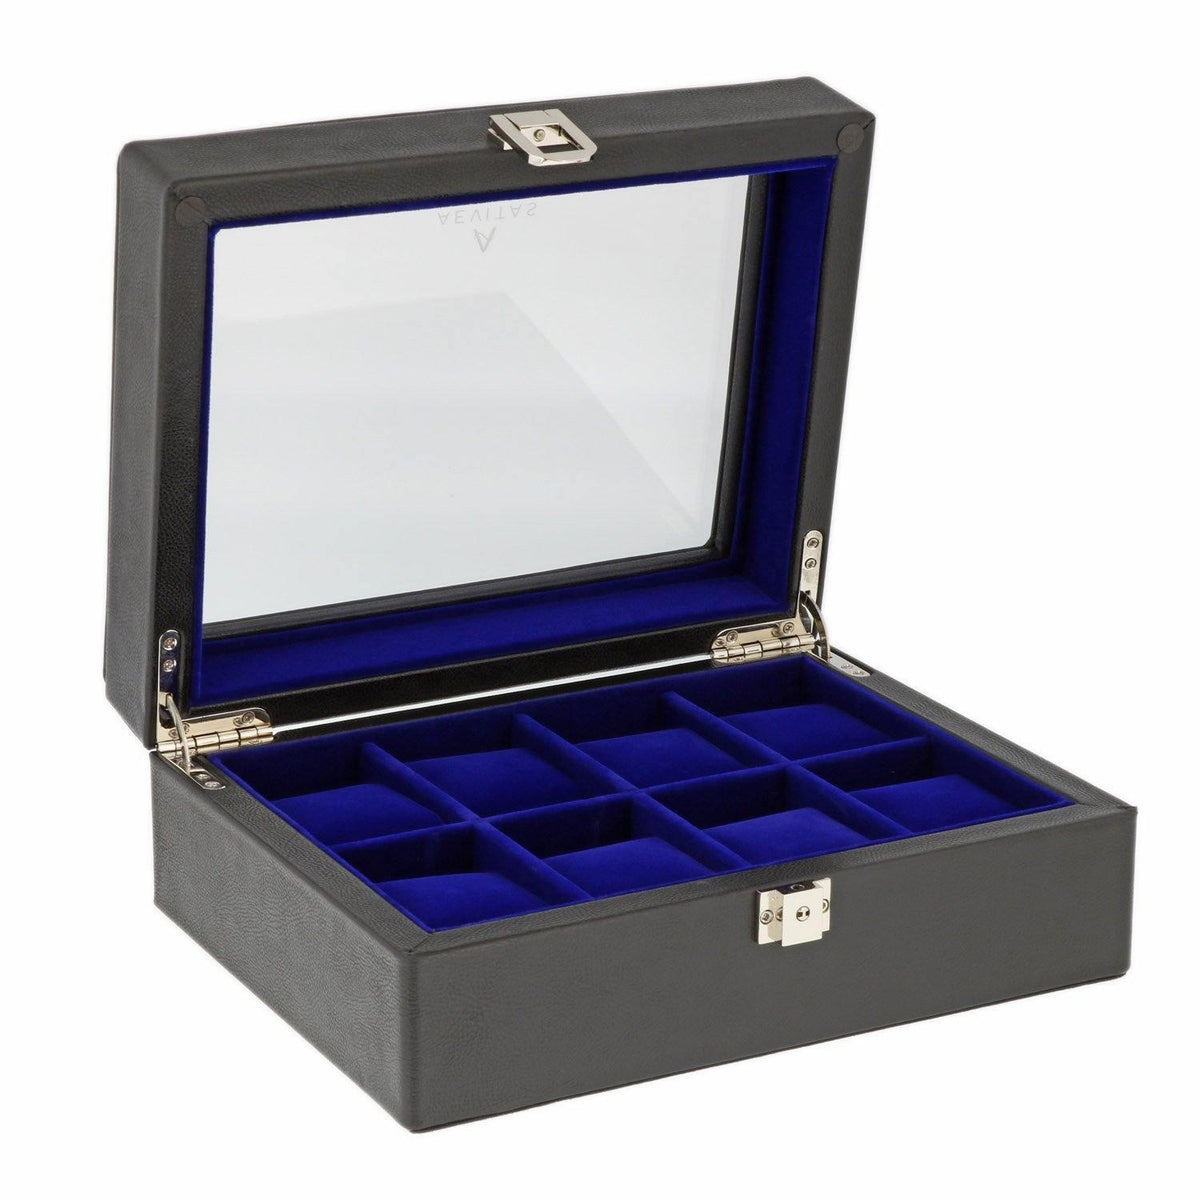 Black Genuine Leather Watch Collectors Box for 8 Wrist Watches Royal Blue Velvet Lining by Aevitas